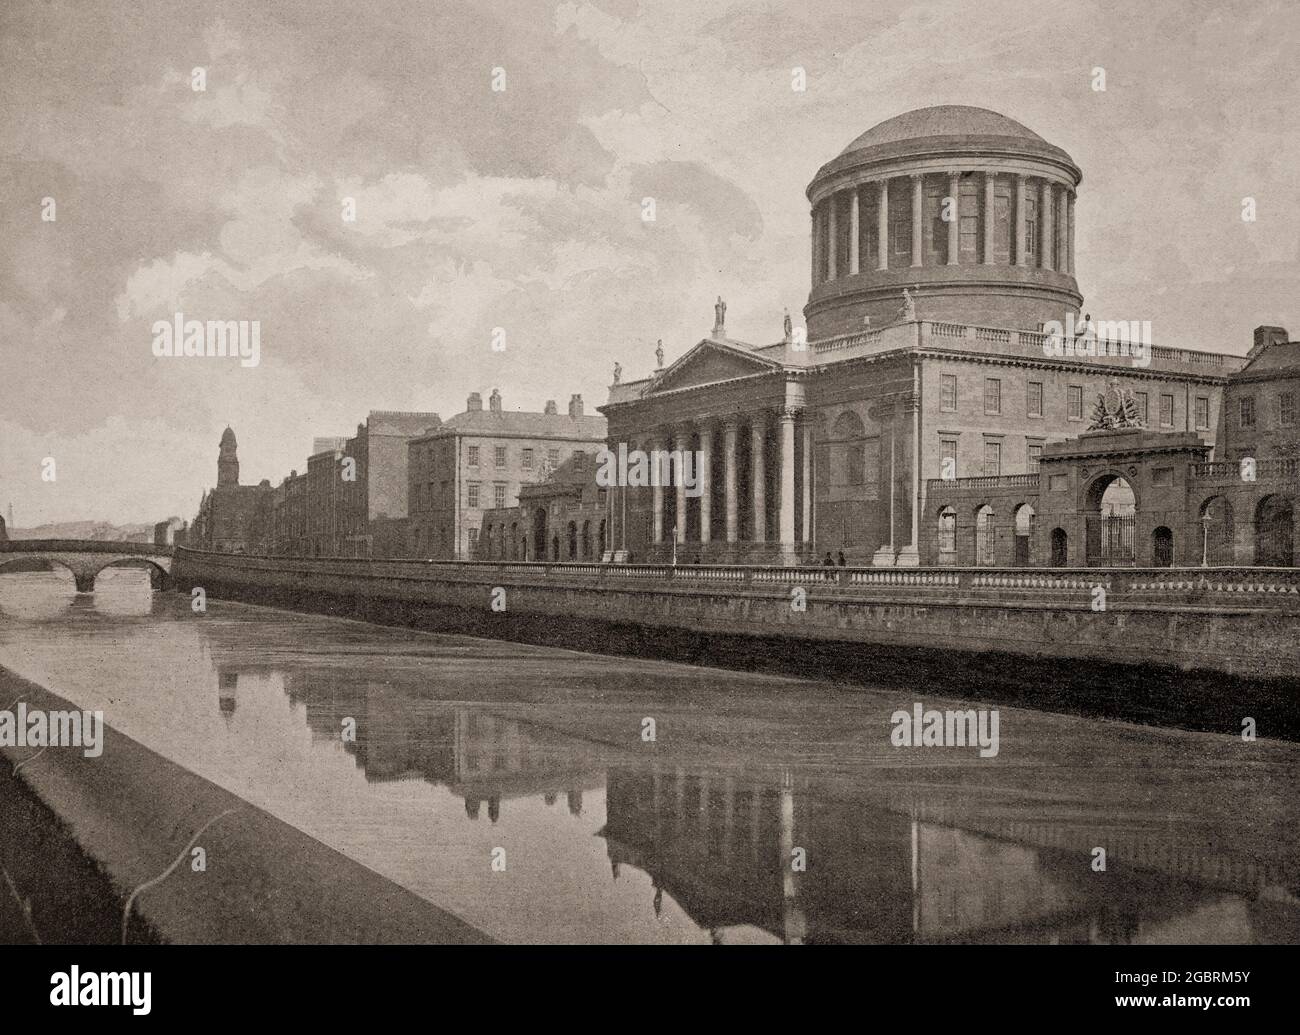 A late 19th century view of the Four Courts reflected in the River Liffey. The building is Ireland's most prominent courts building, located on Inns Quay in Dublin and the principal seat of the Supreme Court, the Court of Appeal, the High Court and the Dublin Circuit Court. It was based on the design of Thomas Cooley for the Public Records Office of Ireland, but after his death in 1784, the renowned architect James Gandon was appointed to finish the building. Built between 1786 and 1796, the finishing touches to the arcades and wings were completed in 1802. Stock Photo